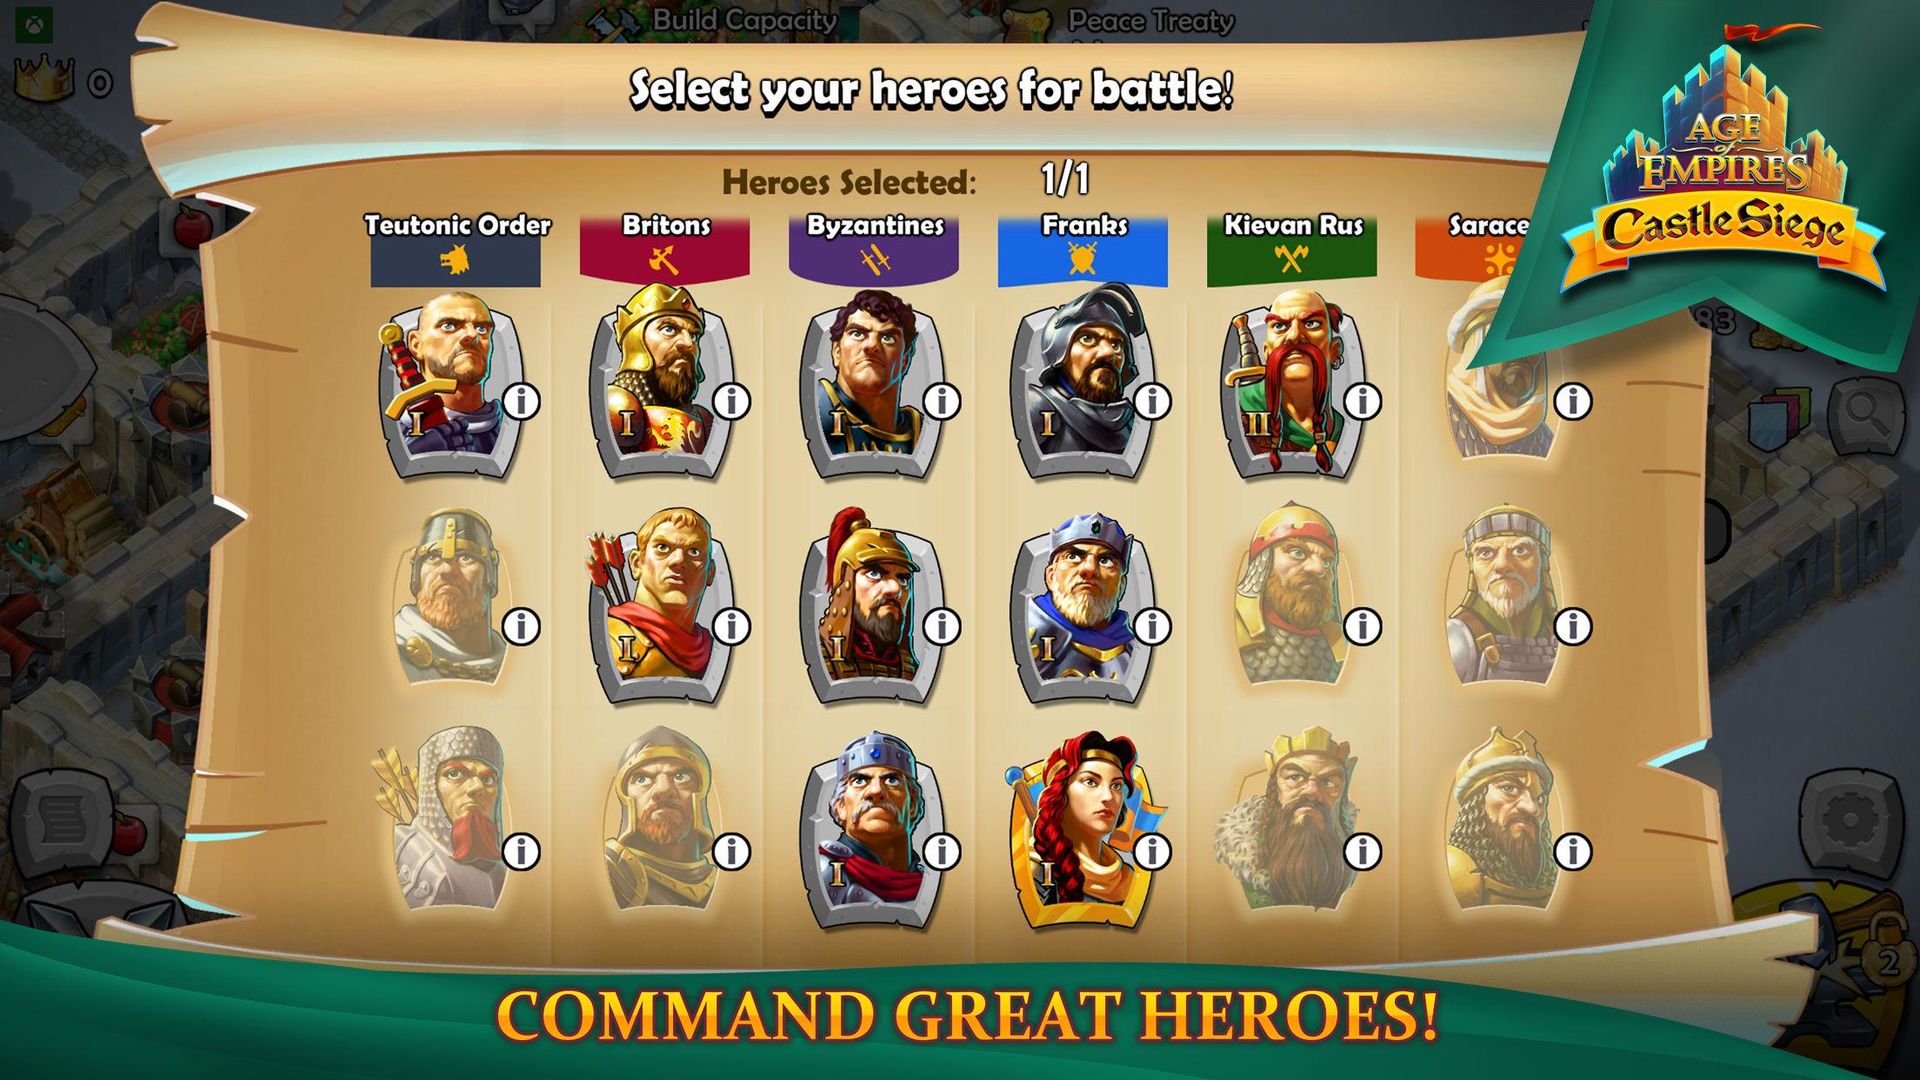 Screenshot of Age of Empires: Castle Siege